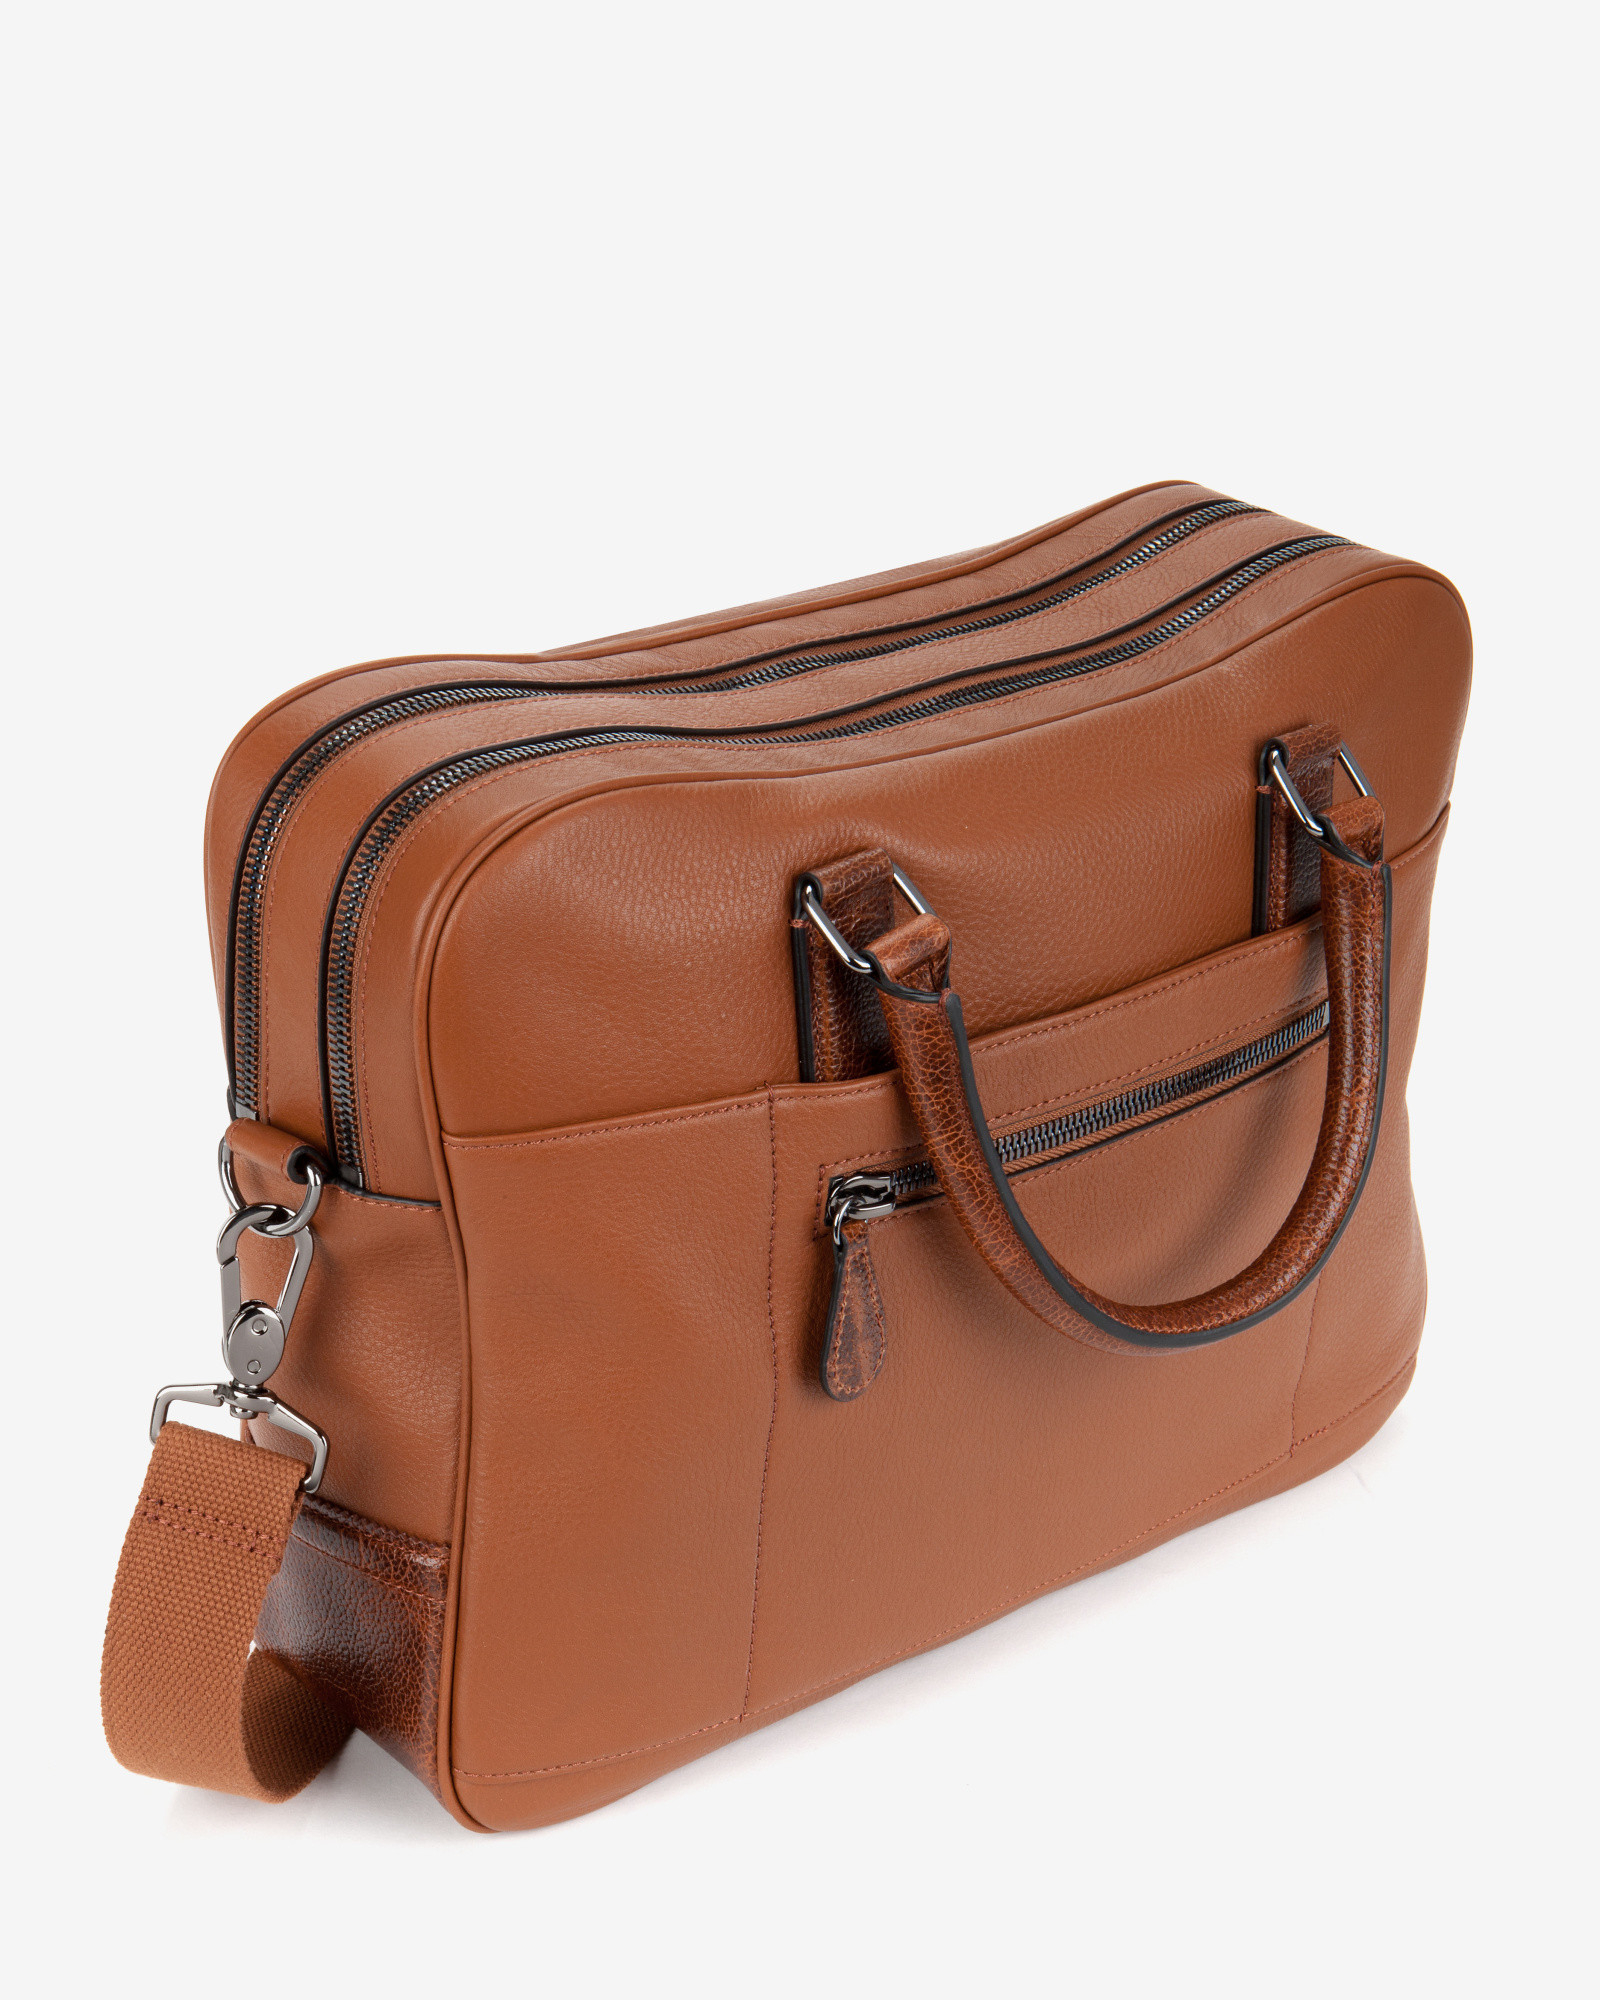 Ted Baker Leather Document Bag in Tan (Brown) for Men - Lyst